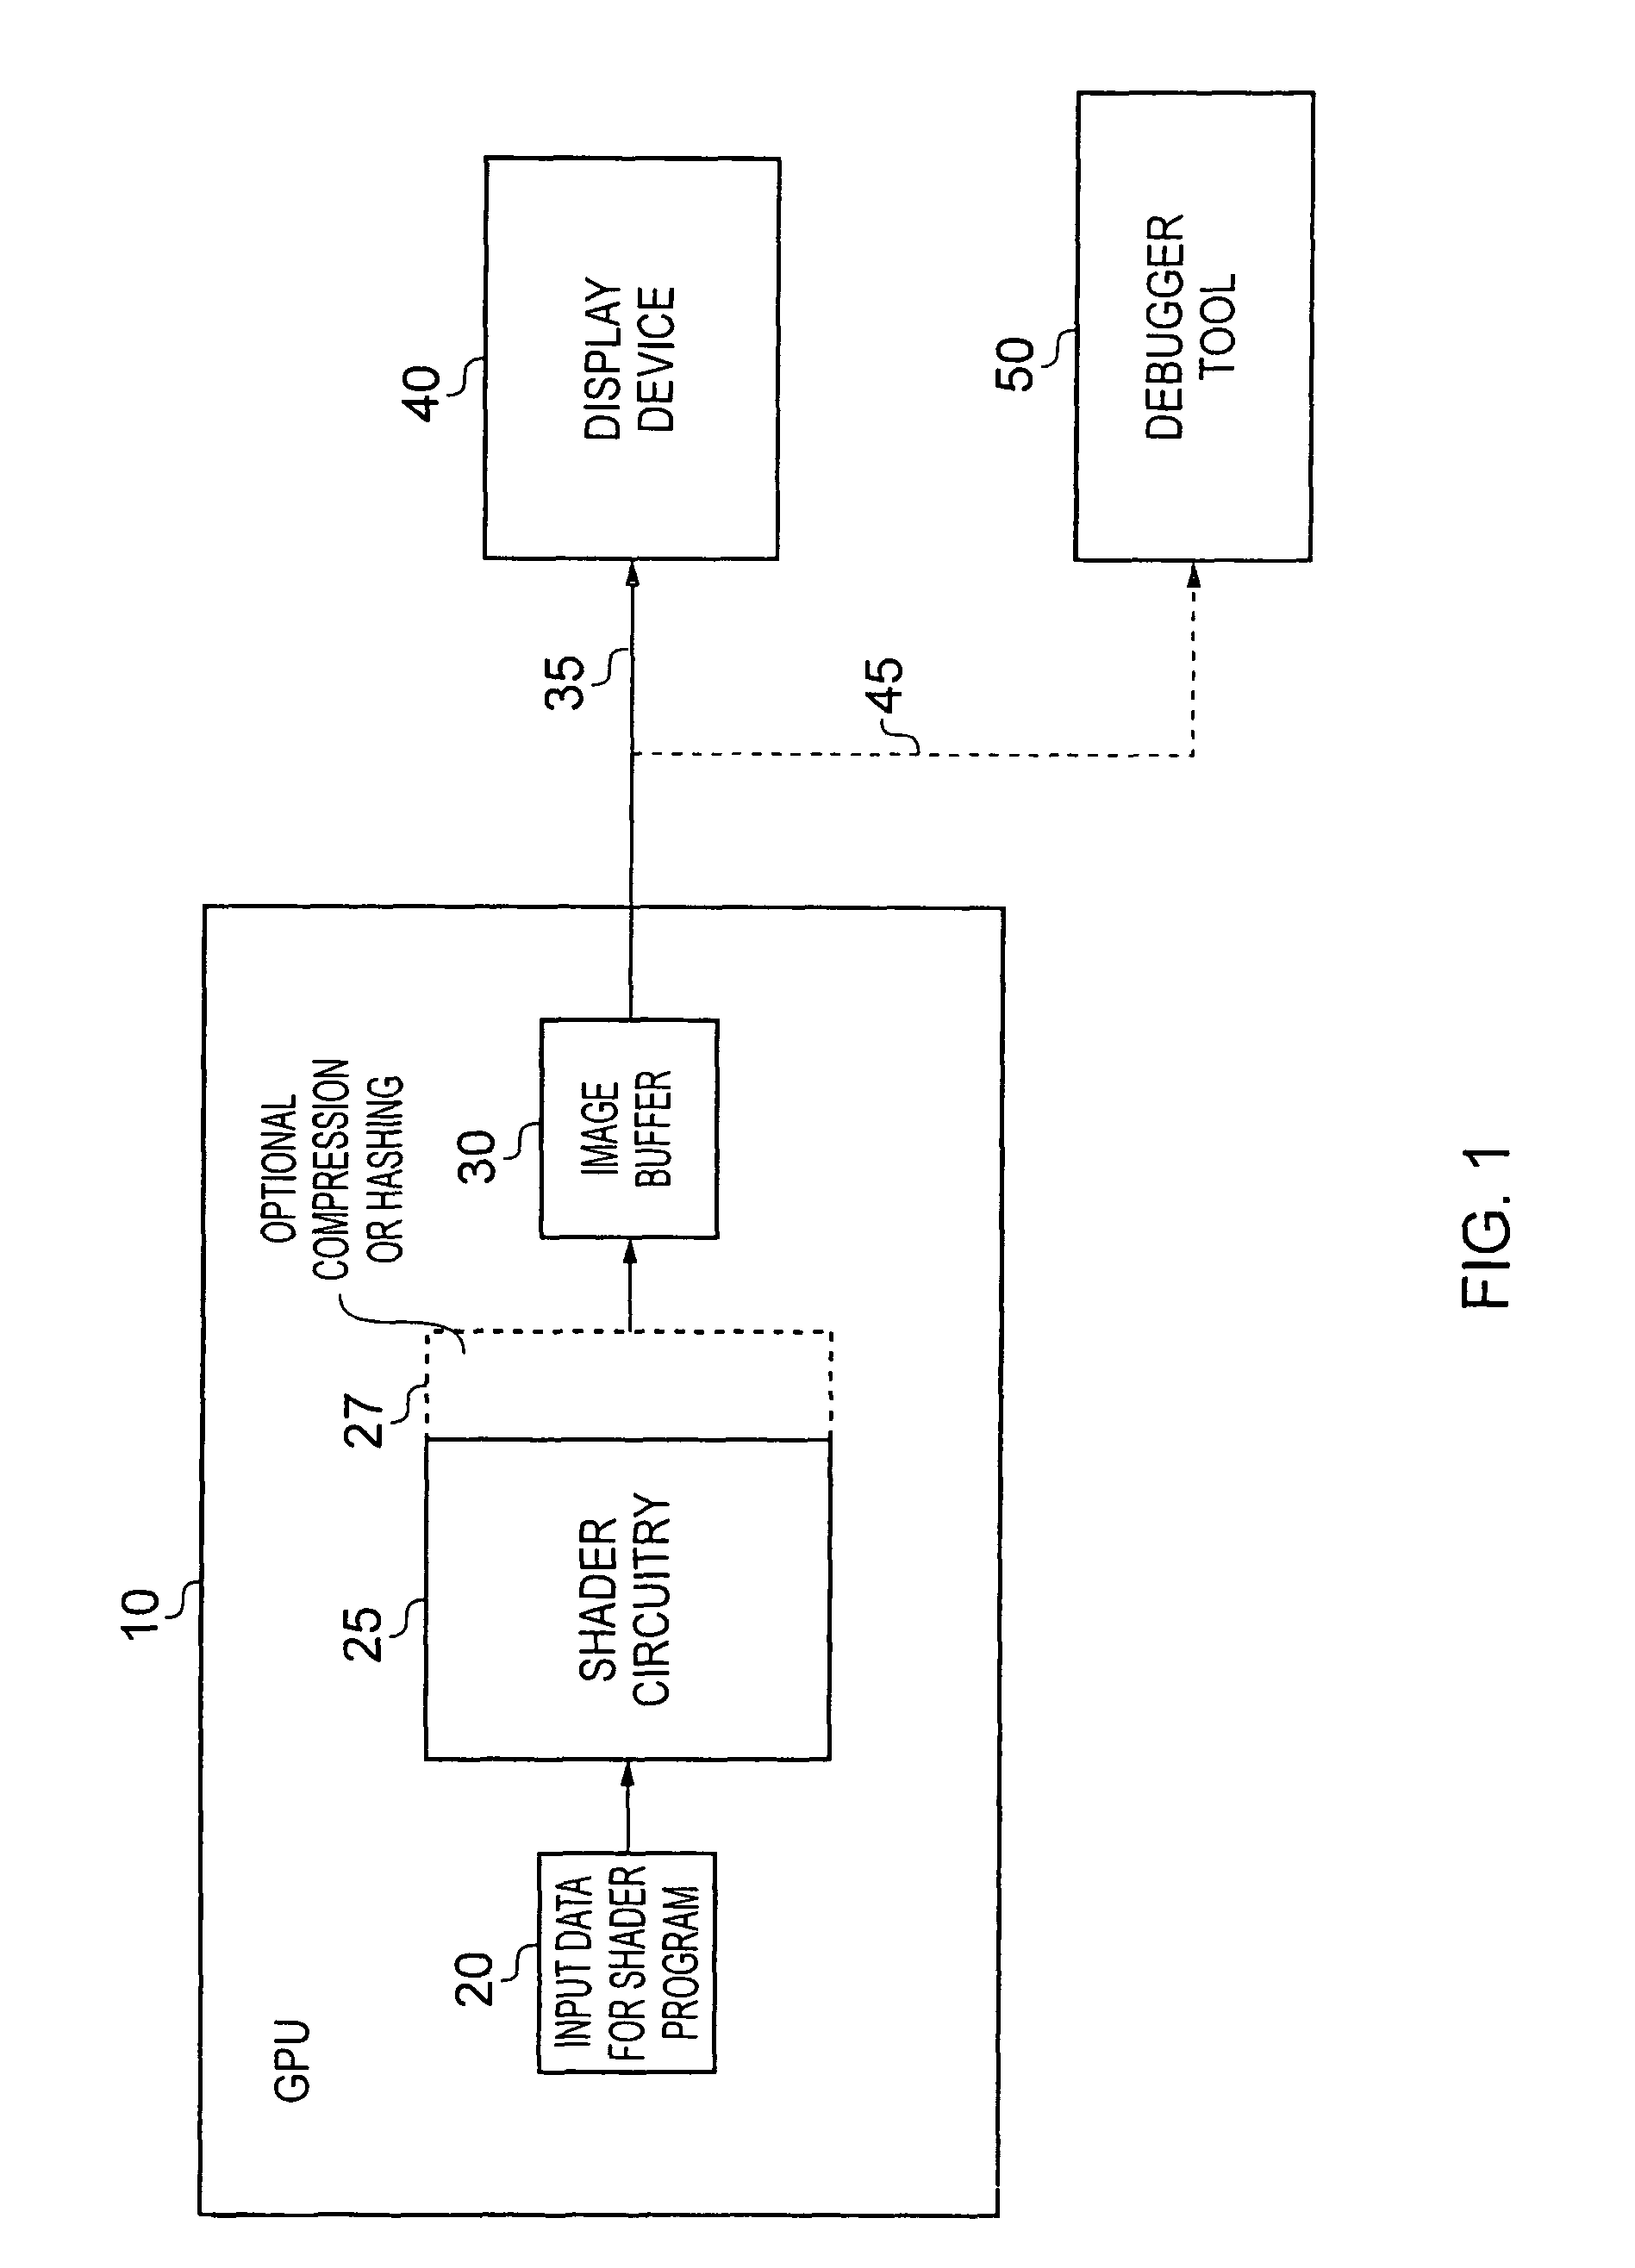 Apparatus and method for tracing activities of a shader program executed on shader circuitry of a data processing apparatus